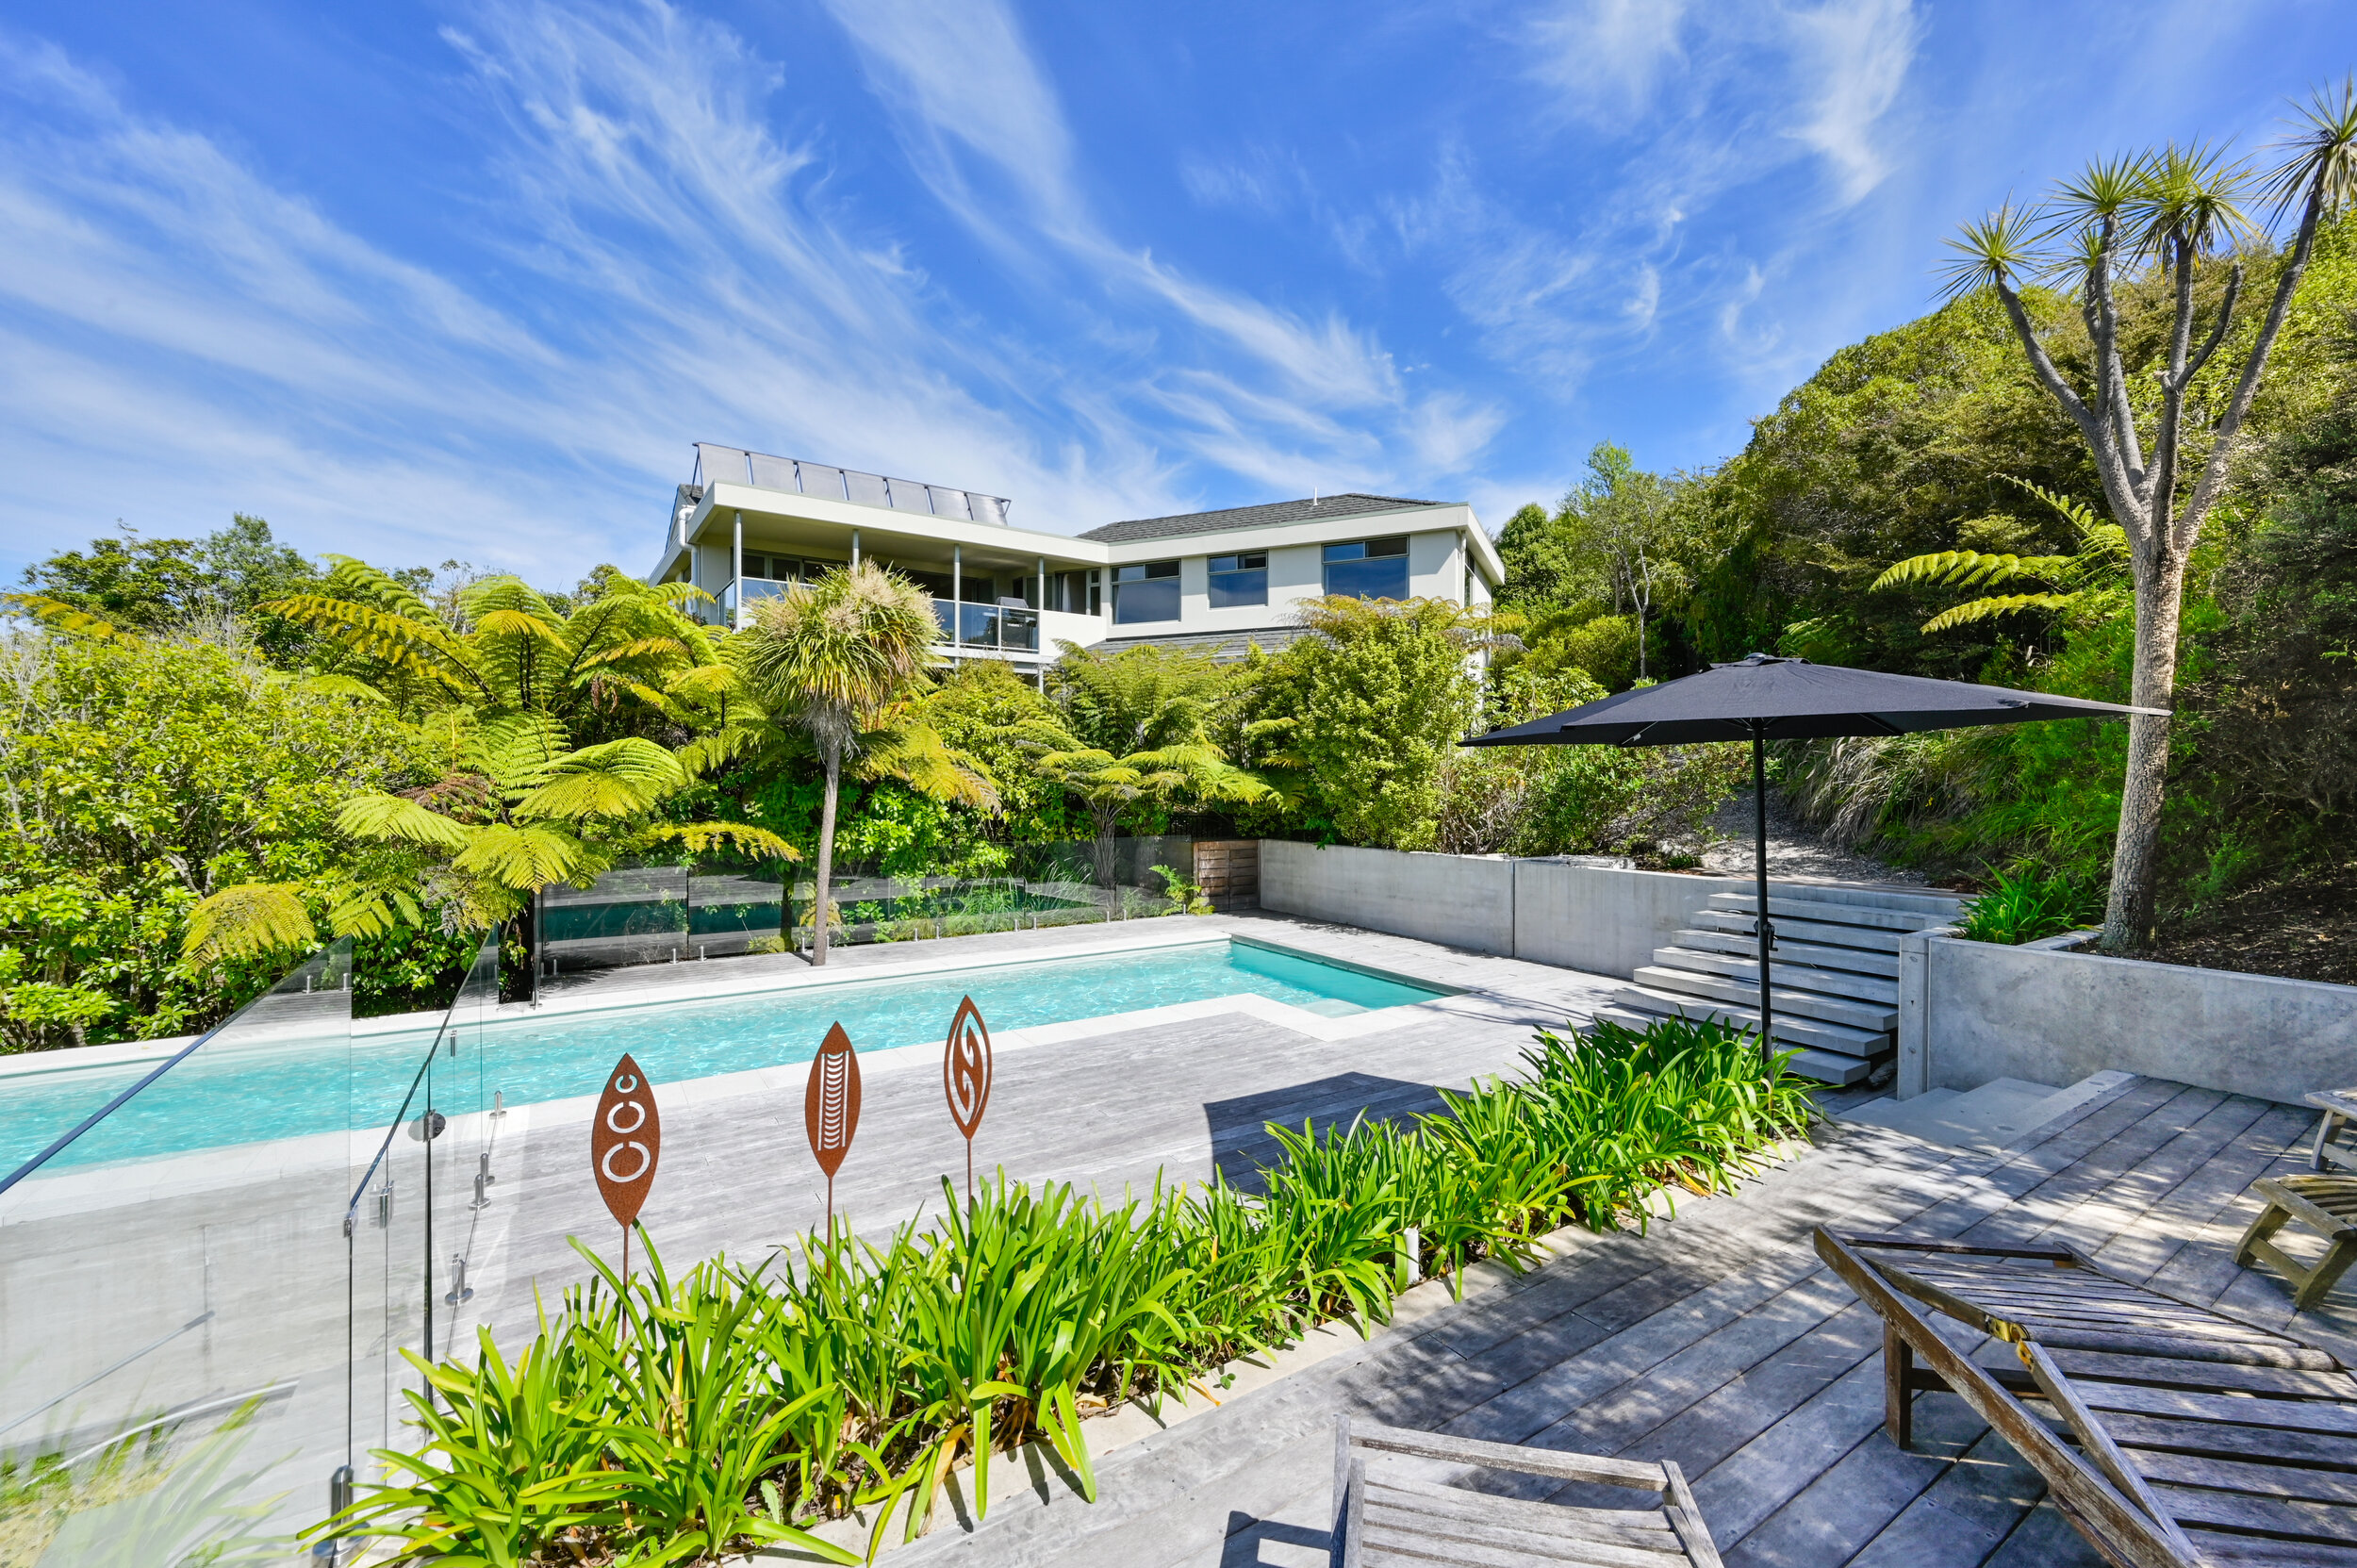  Property Real estate Architecture Ray White House for sale   Commercial Photography Nelson Tasman / Commercial photographer Nelson Tasman Commercial shoot / Commercial videography   Landscape photographer New Zealand / New Zealand landscape   Commer